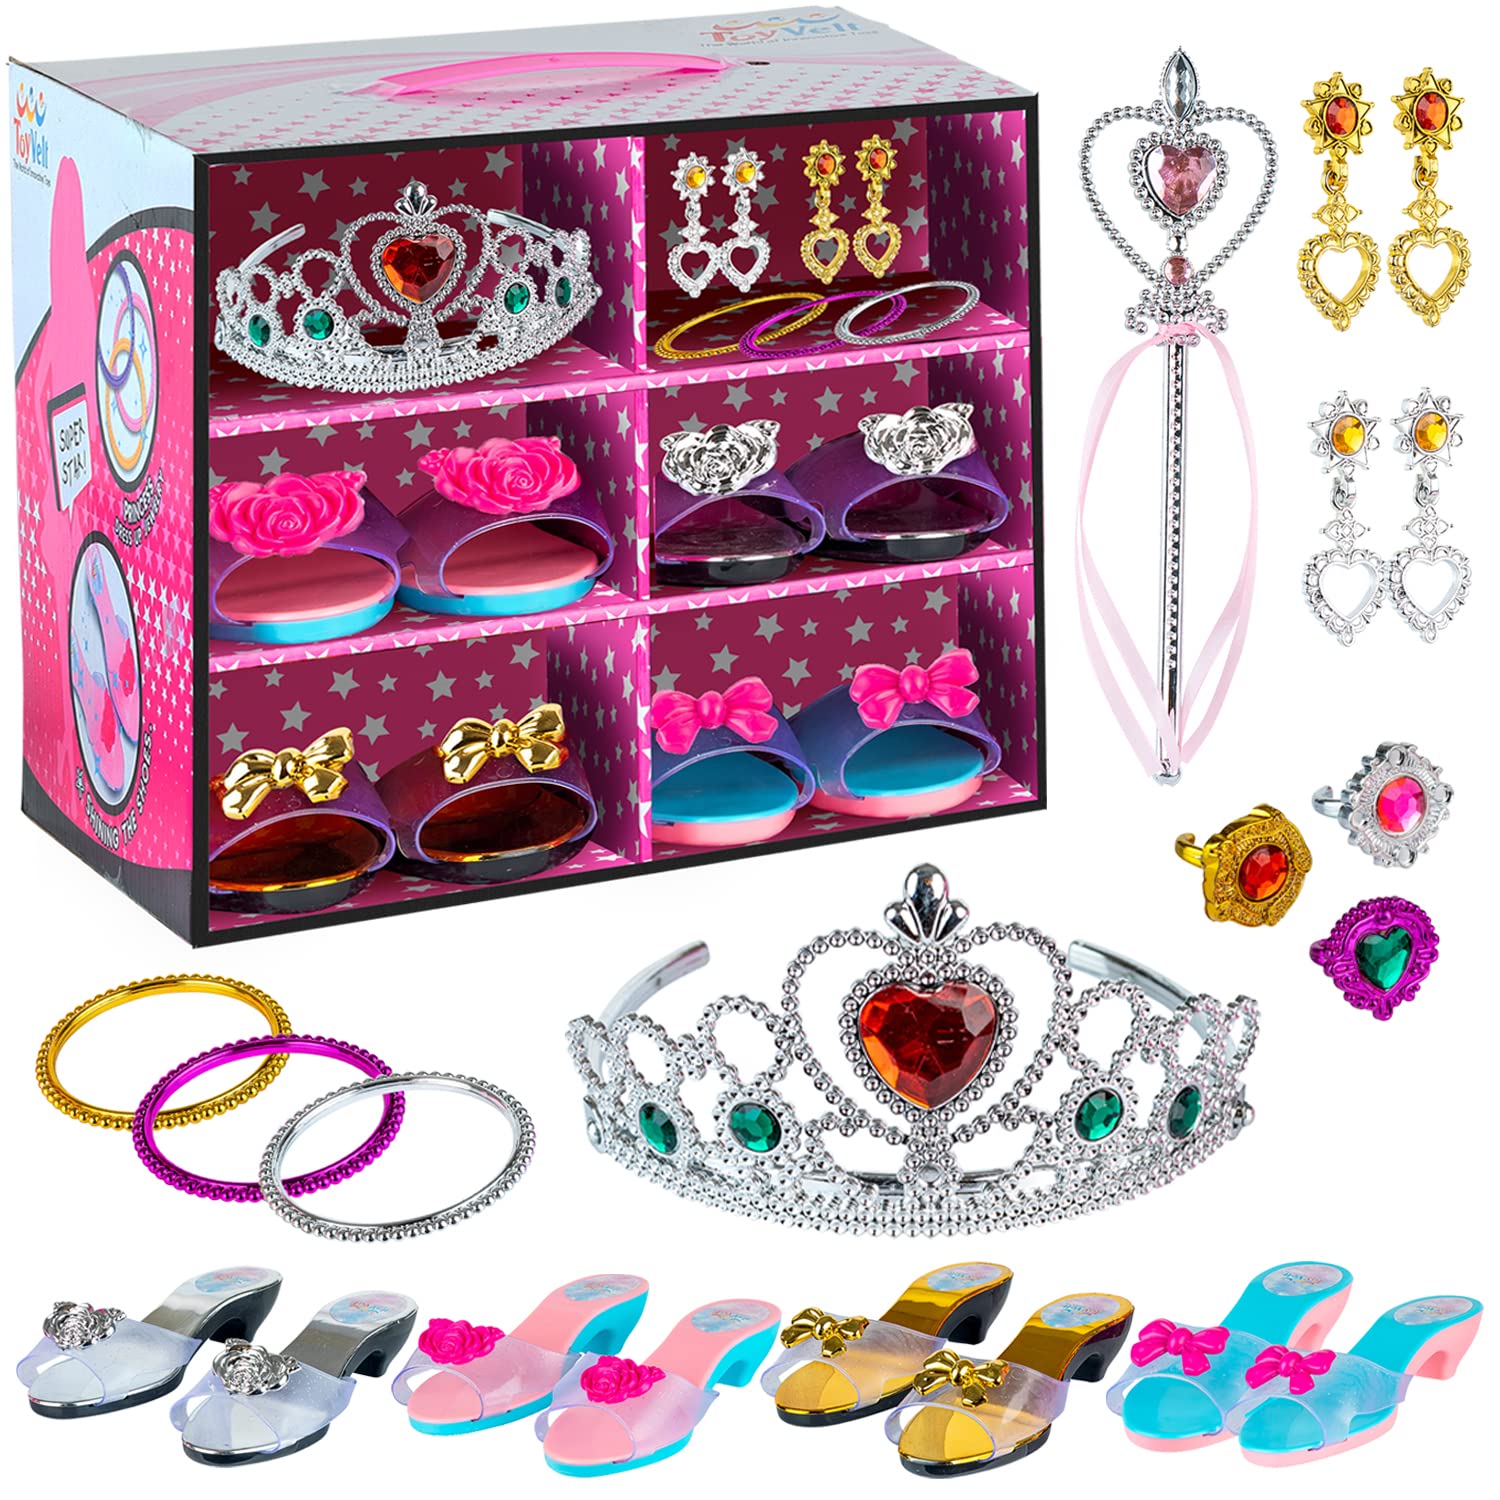 ToyVelt Princess Dresses for Girls, Princess Dress Up Includes 4 Pairs Princess Shoes, 3 Bangles, 3 Rings, 2 Pairs of Earrings, 1 Crown, 1 Princess Wand, Ideal Princess Dress Up shoes for girls 4-6